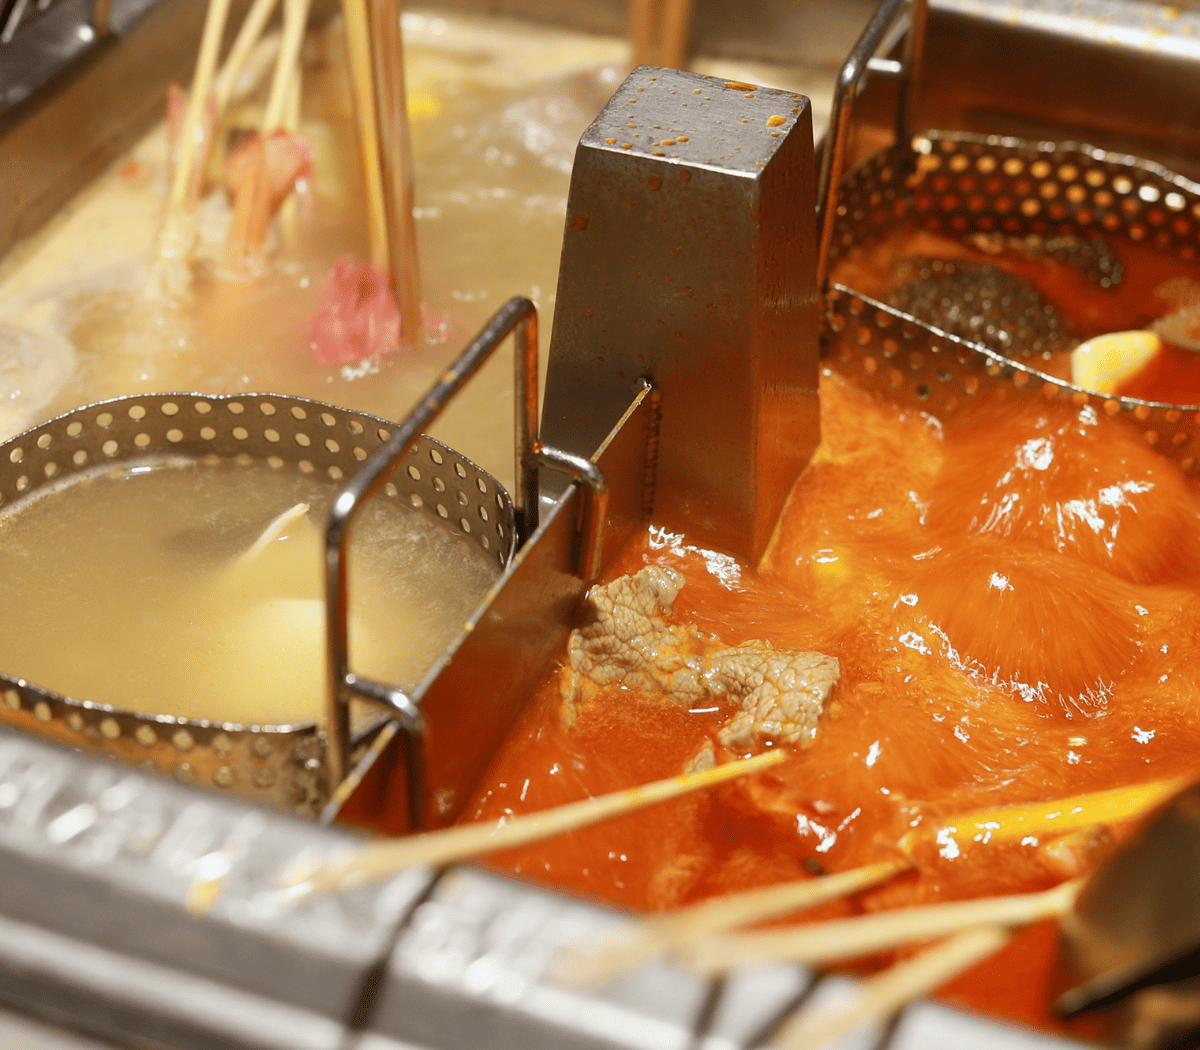 A Guide to Hot Pot at Home